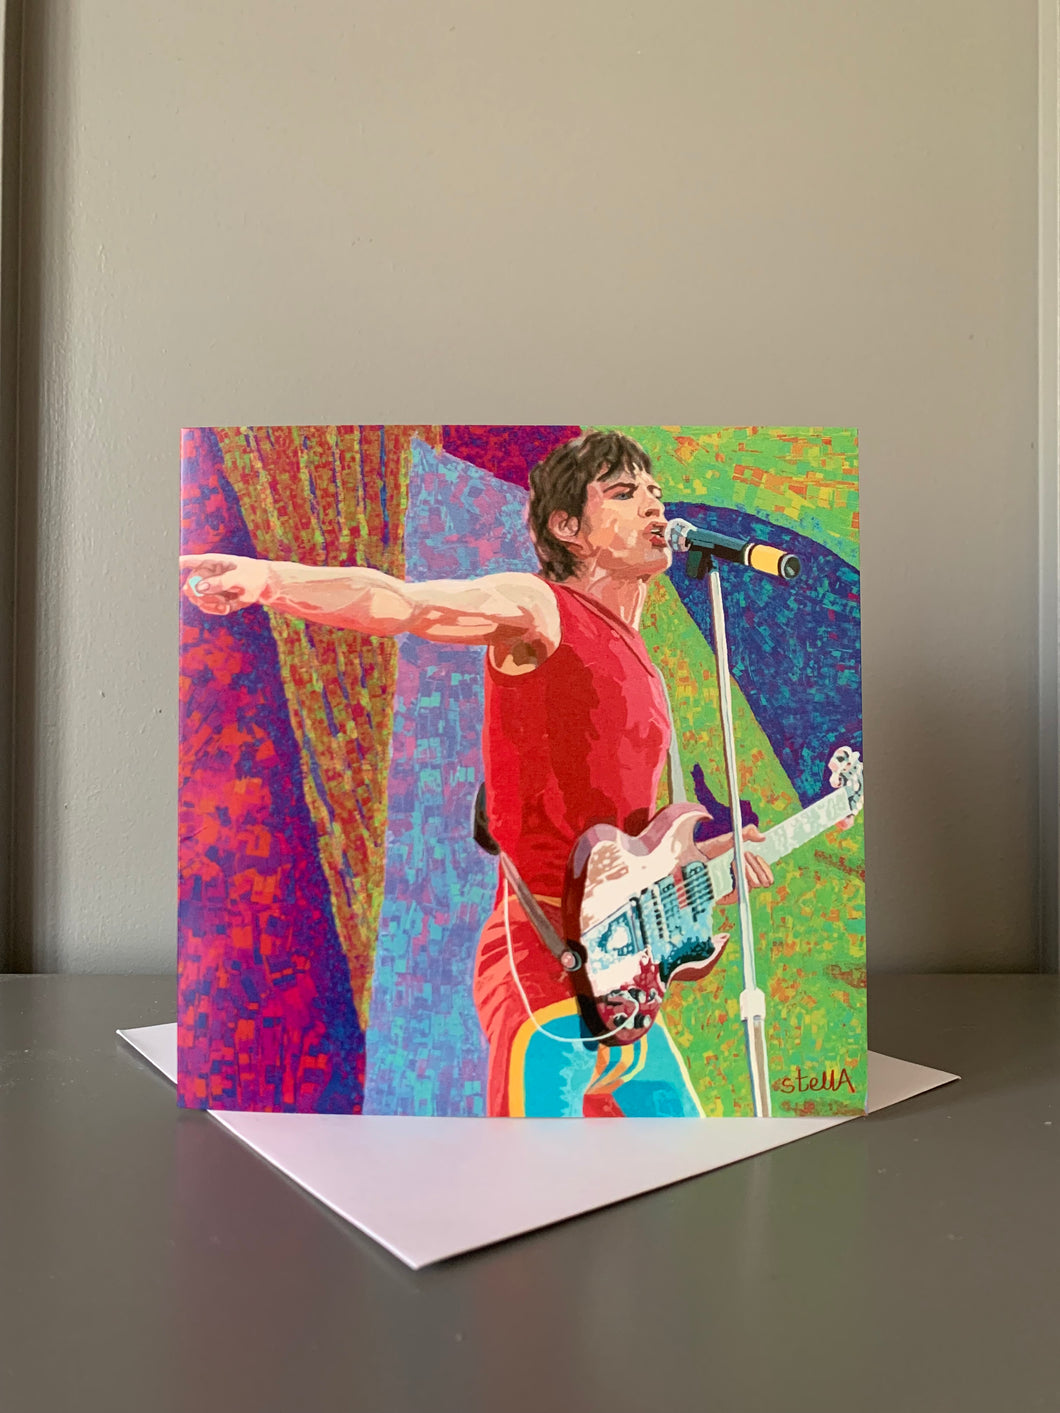 Mick Jagger fine art greetings card inspired by digital painting by Stella Tooth